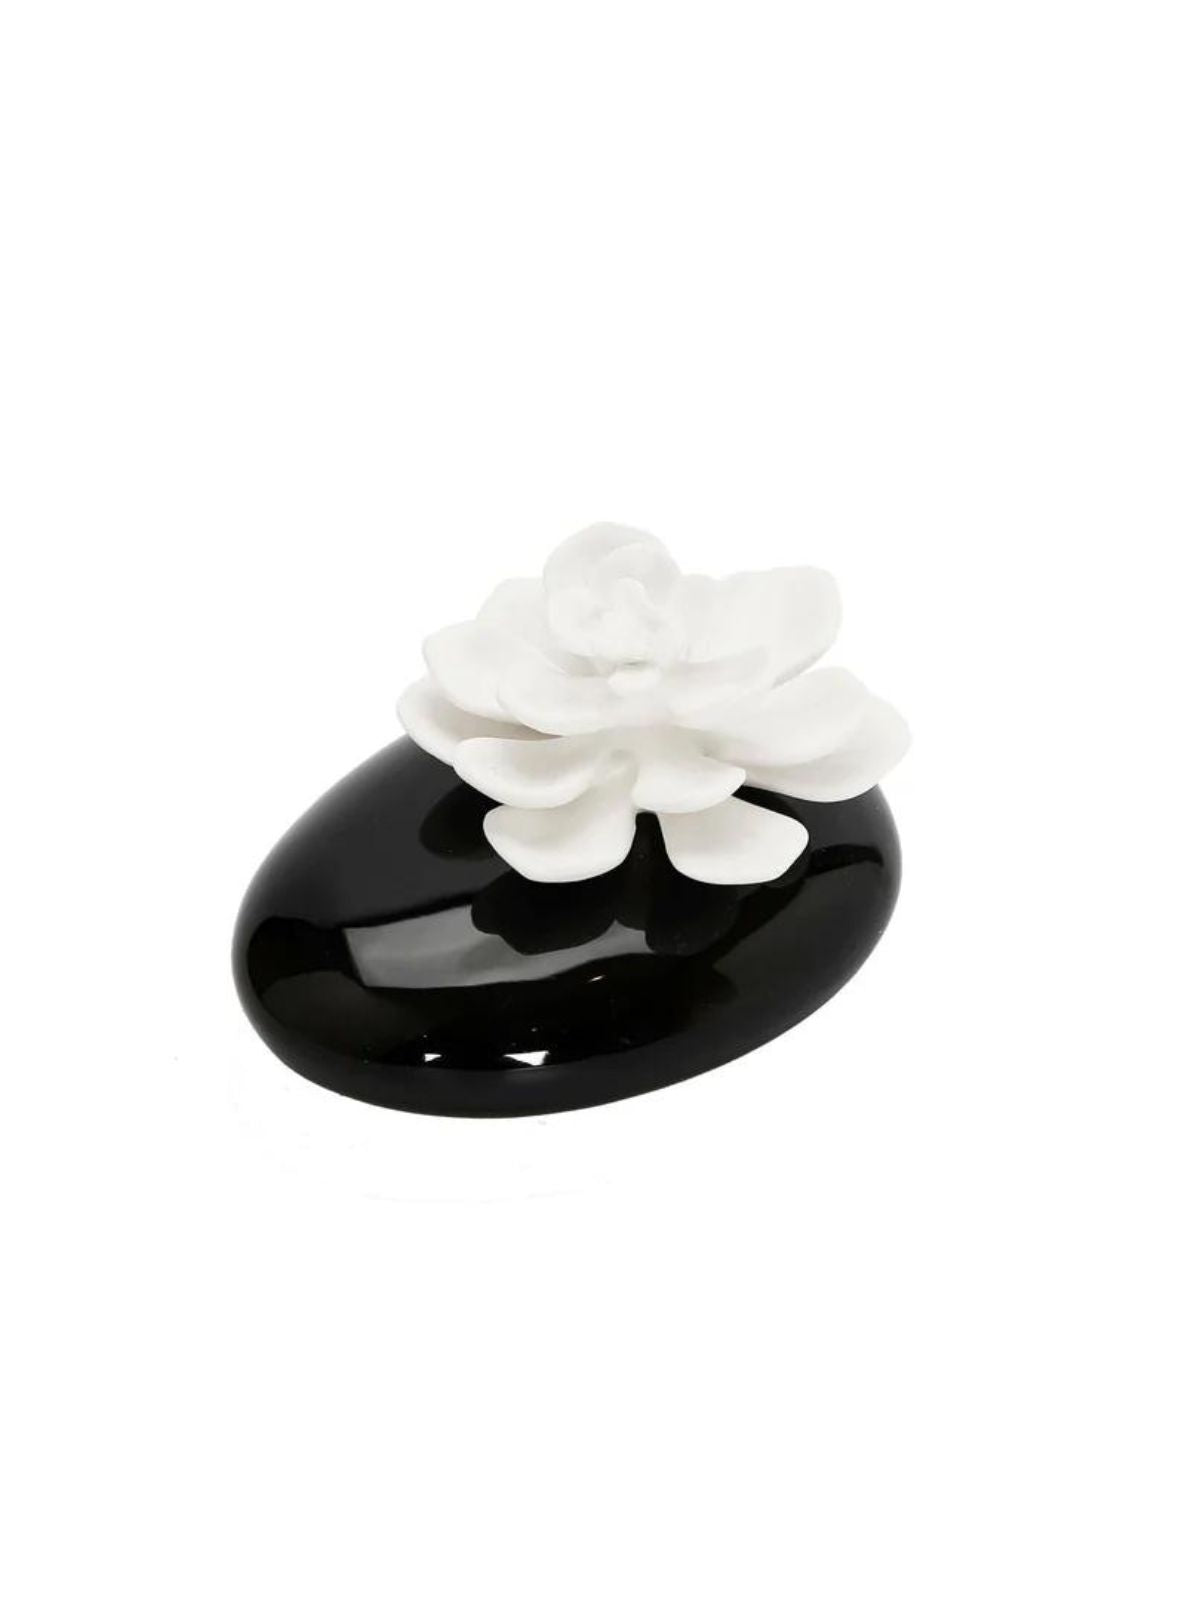 Dispense the scent of oils into the air with this Black Diffuser with White Dimensional Flower - KYA Home Decor.